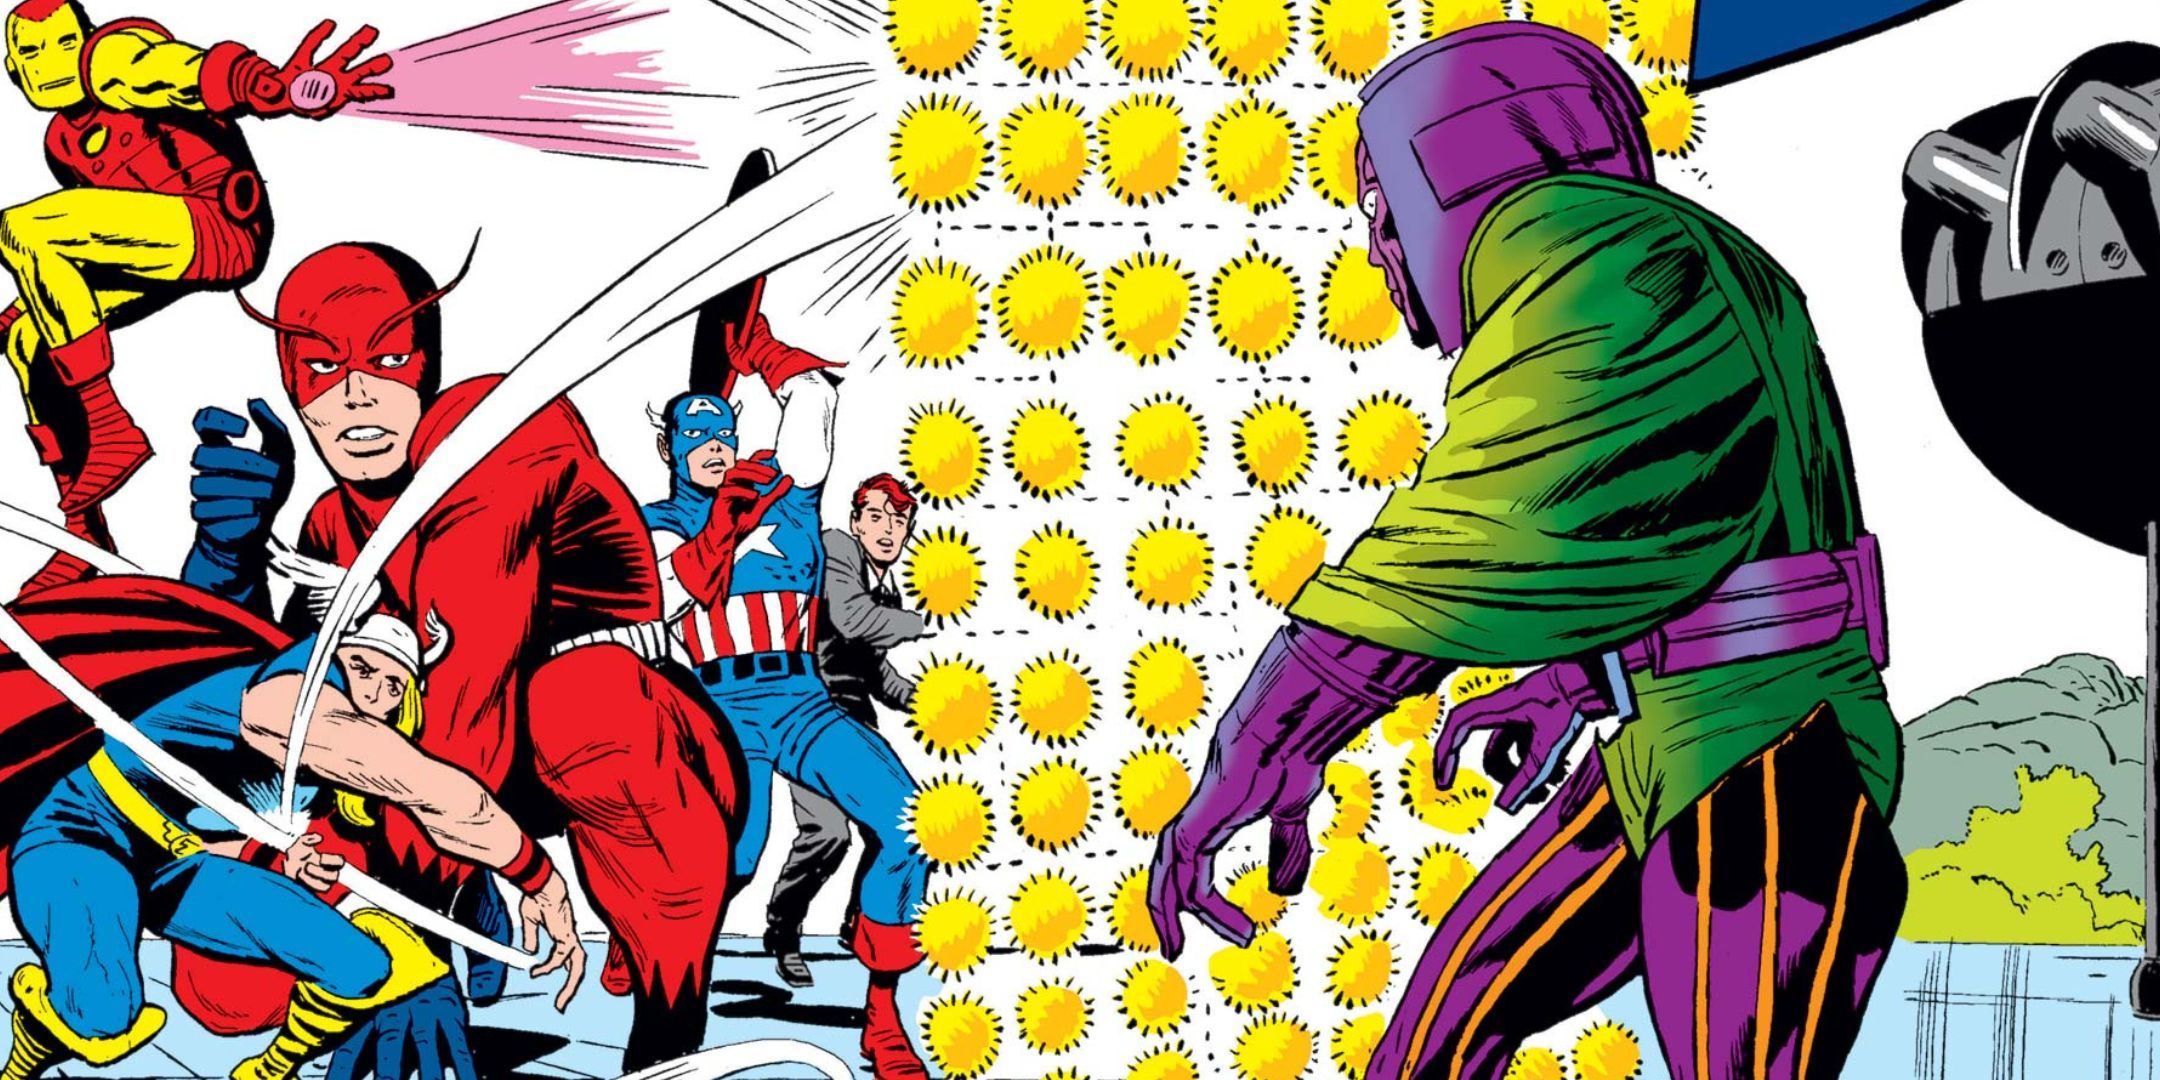 Kang first appearance in Avengers comics